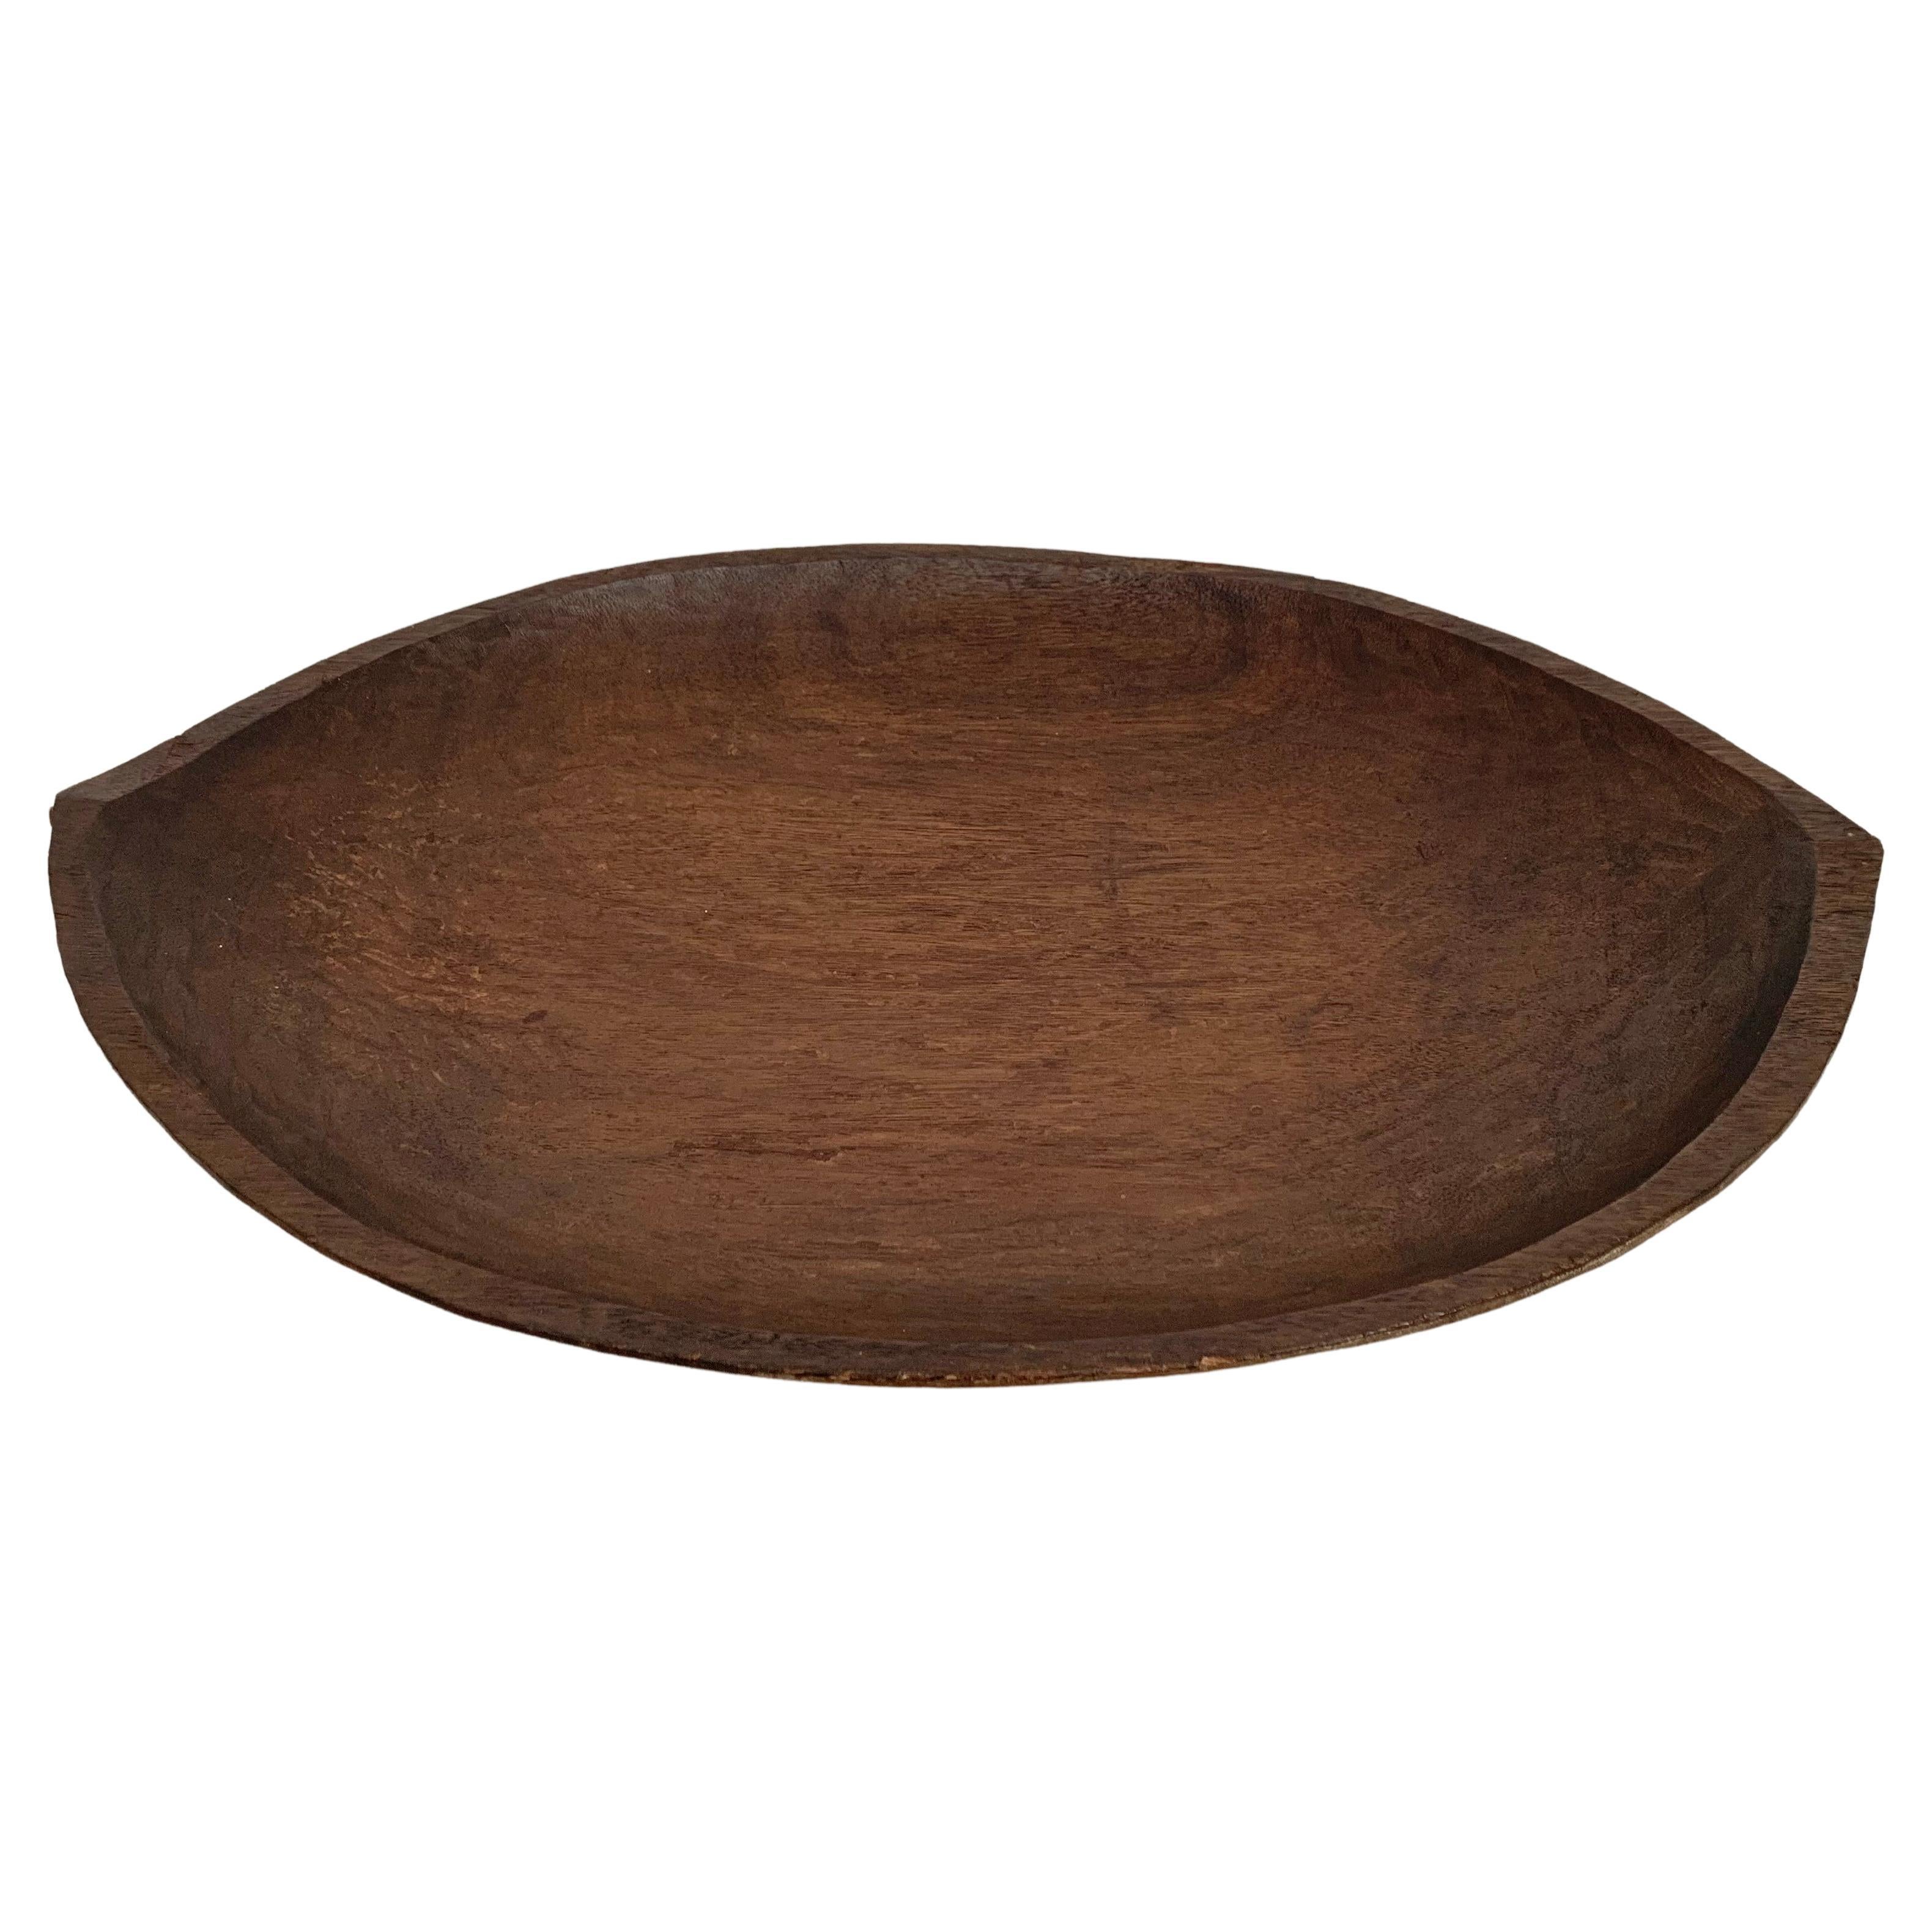 Hand-Carved Wooden Tray / Bowl Mentawai Tribe of Indonesia, Mid-20th Century 